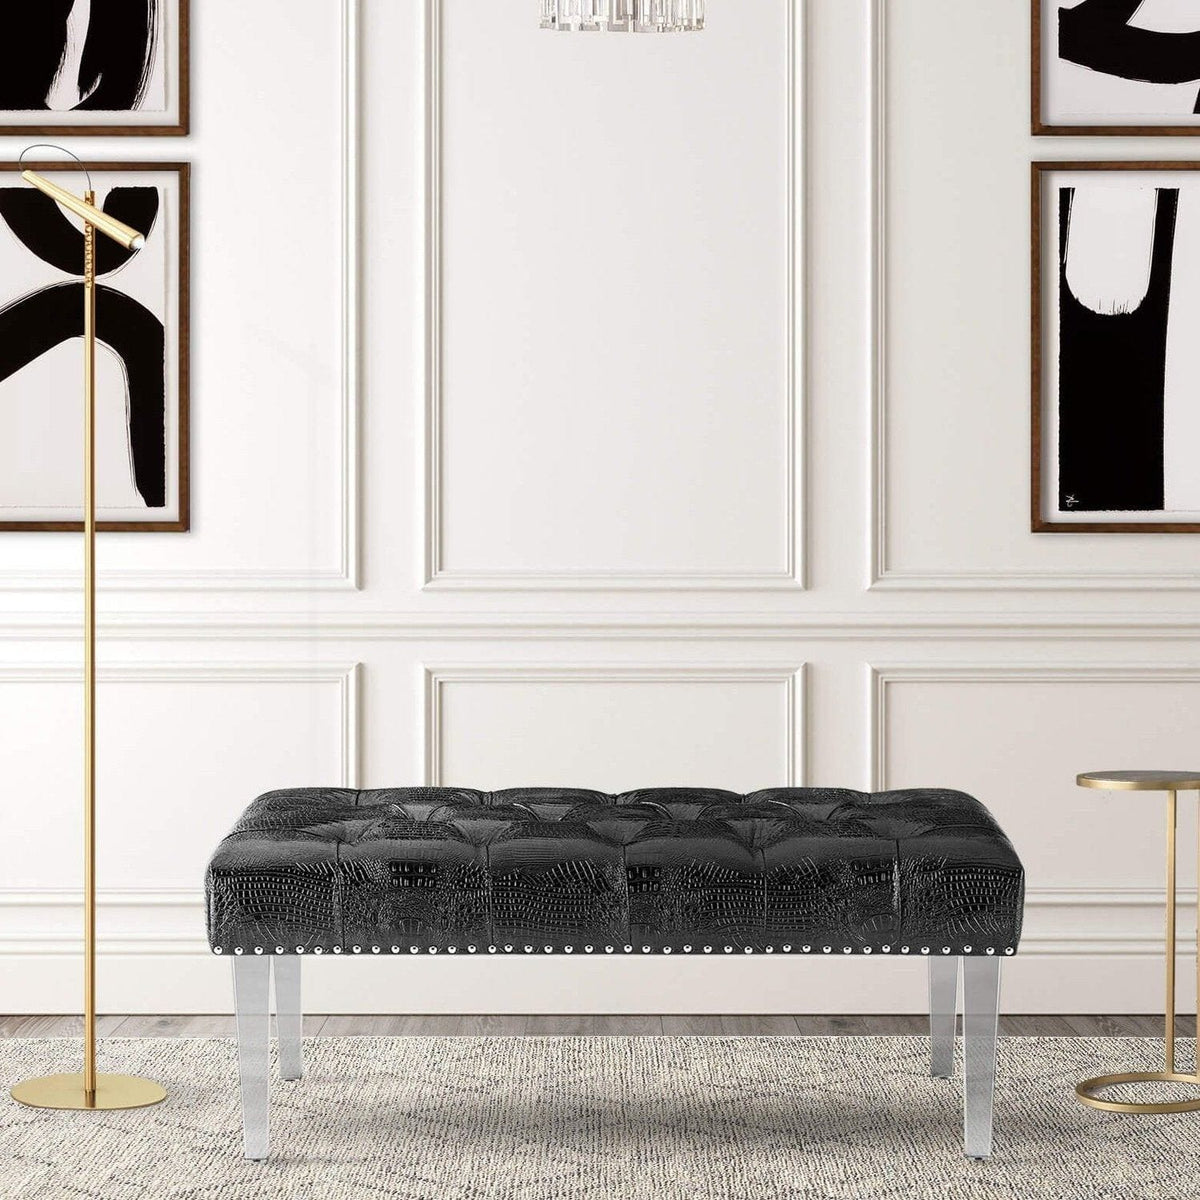 Chic Home Odette Tufted Faux Leather Bench Acrylic Legs Black